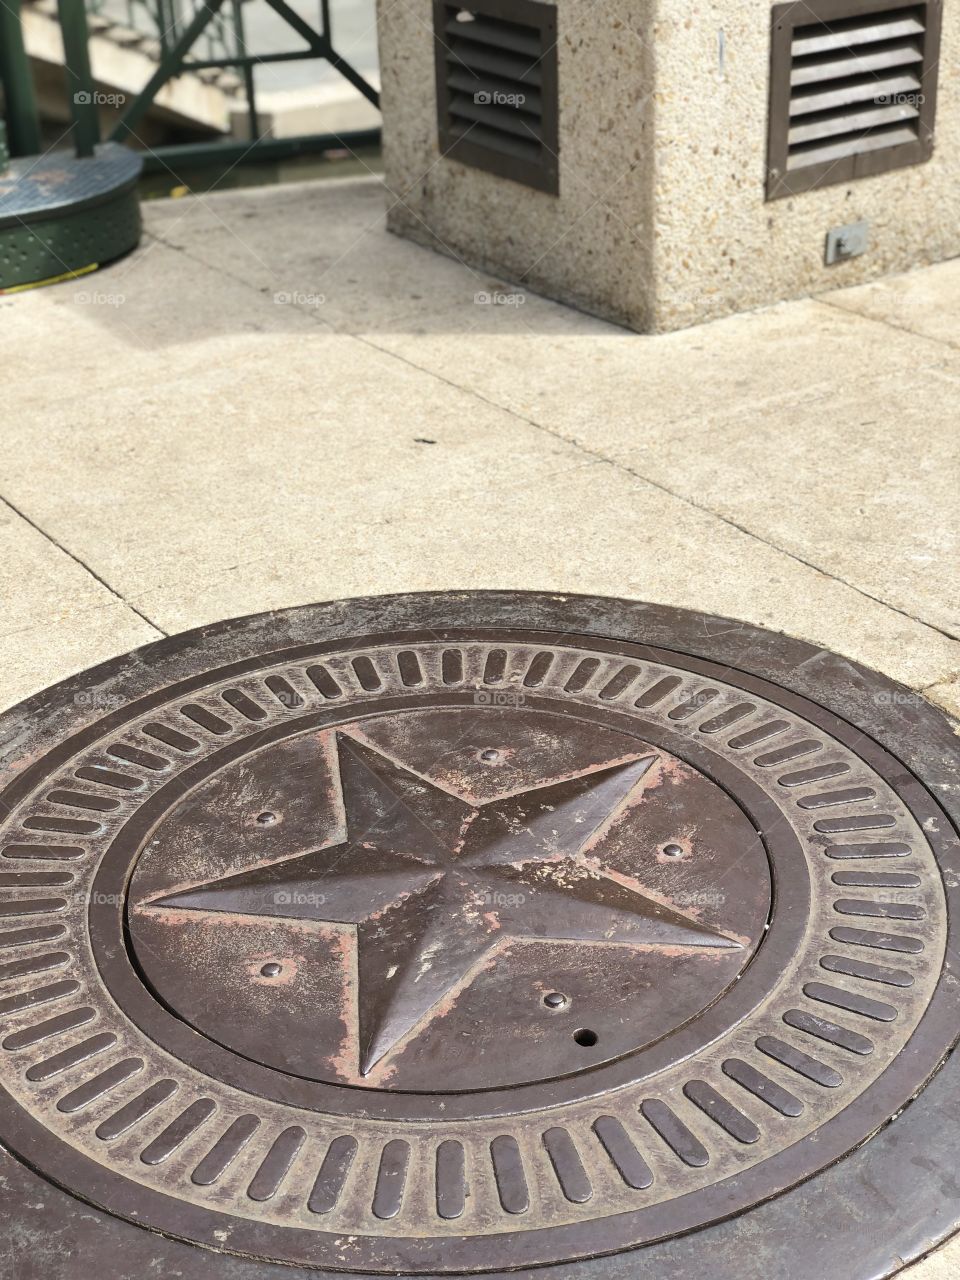 The star seal in San Antonio on the Riverwalk. It’s just pretty to look at, it’s very Texas. 